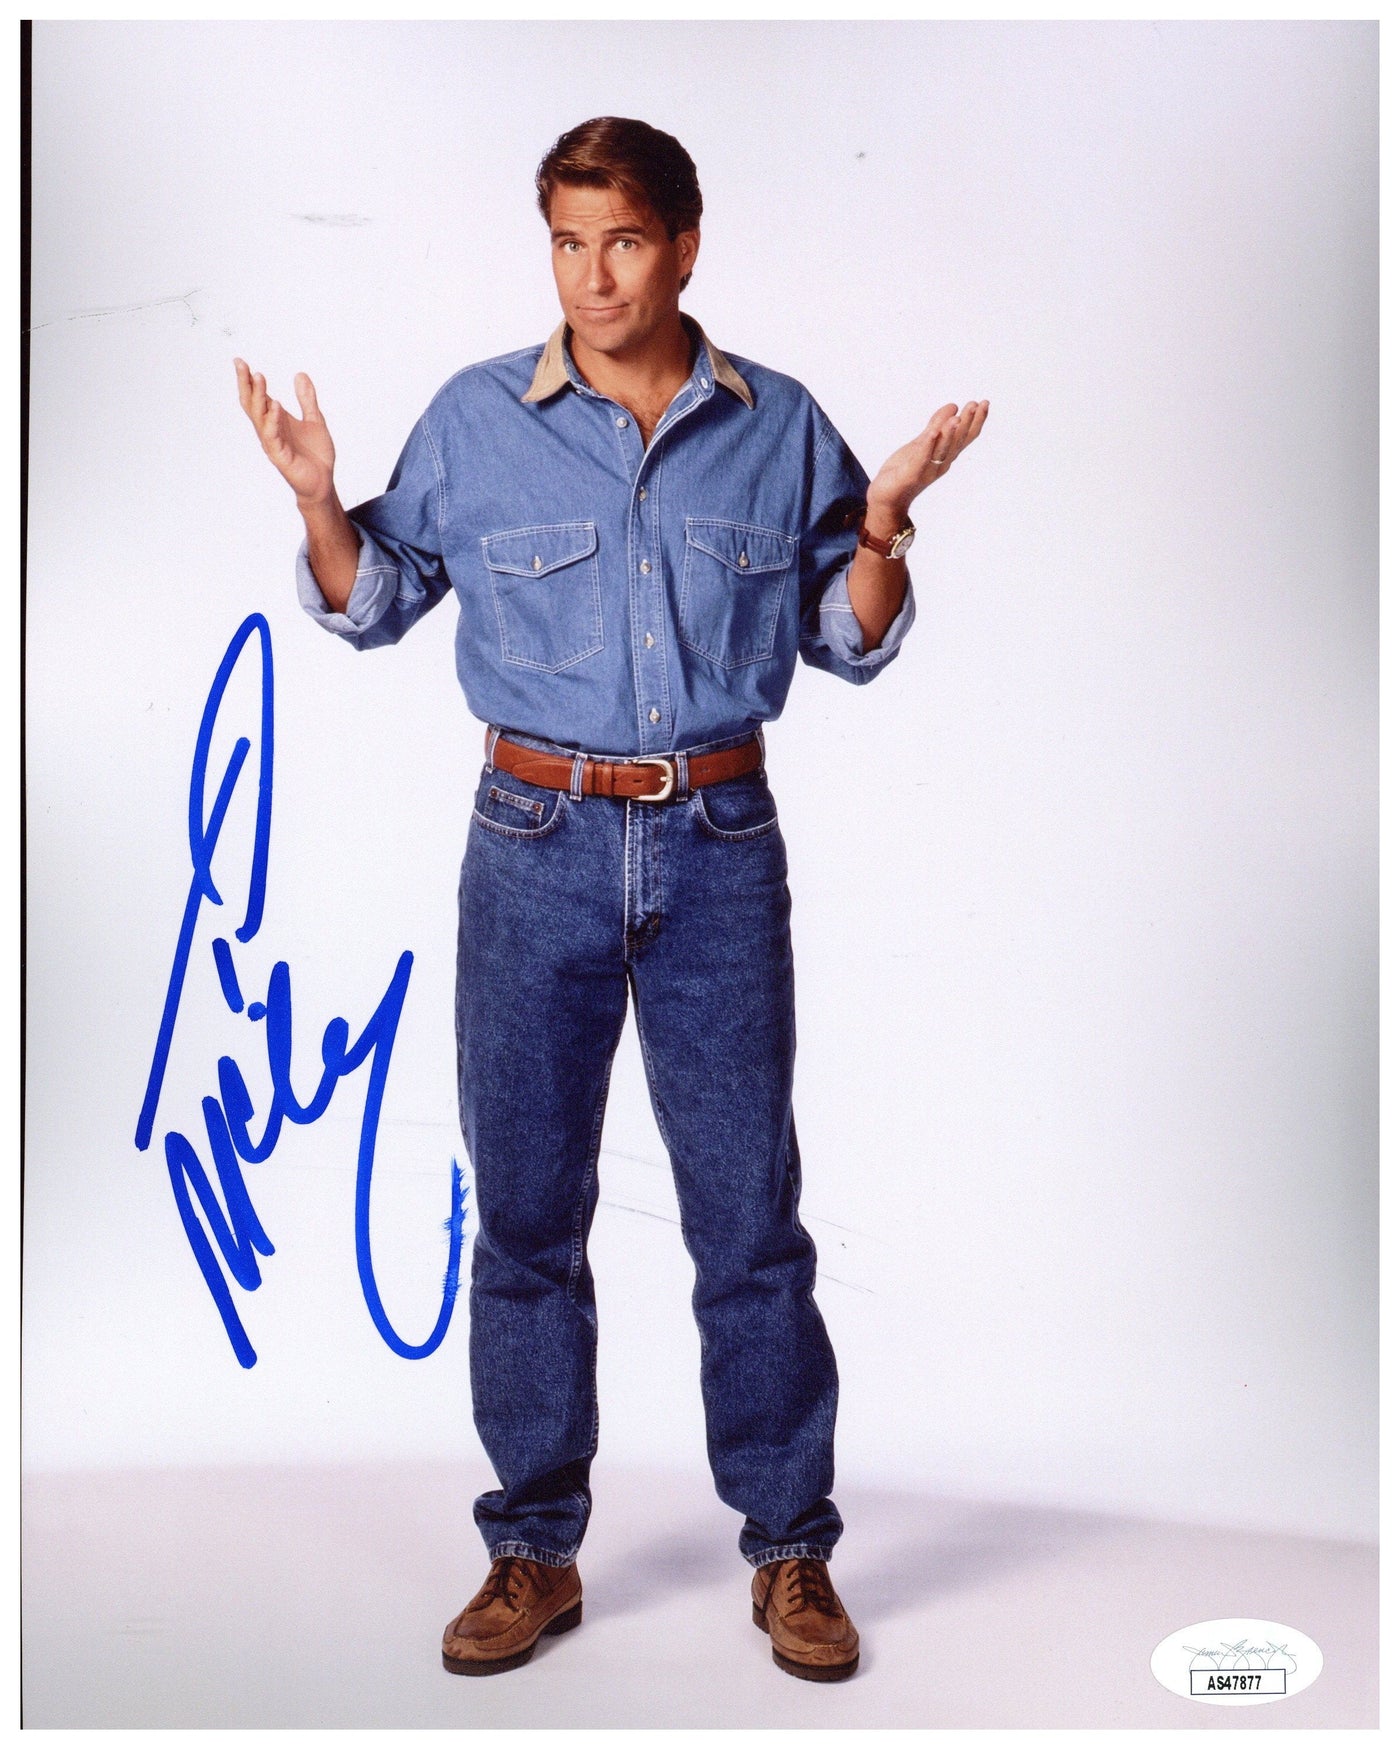 Ted McGinley Signed 8x10 Photo Married with Children Autographed JSA COA